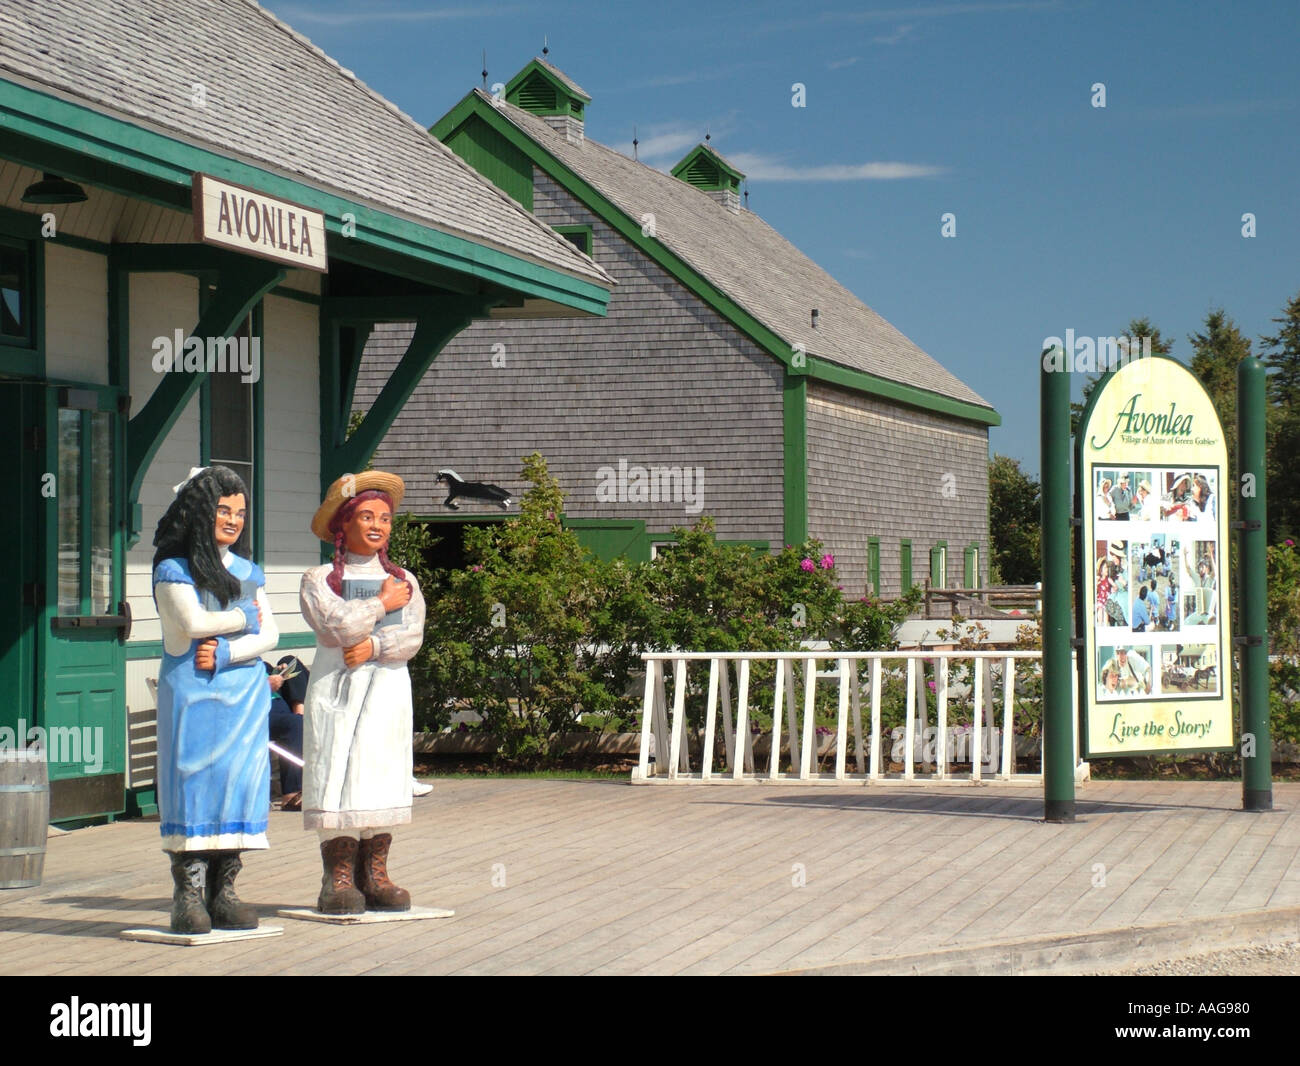 AJD38046, Canada, Prince Edward Island, Queens County, Cavendish Stock Photo